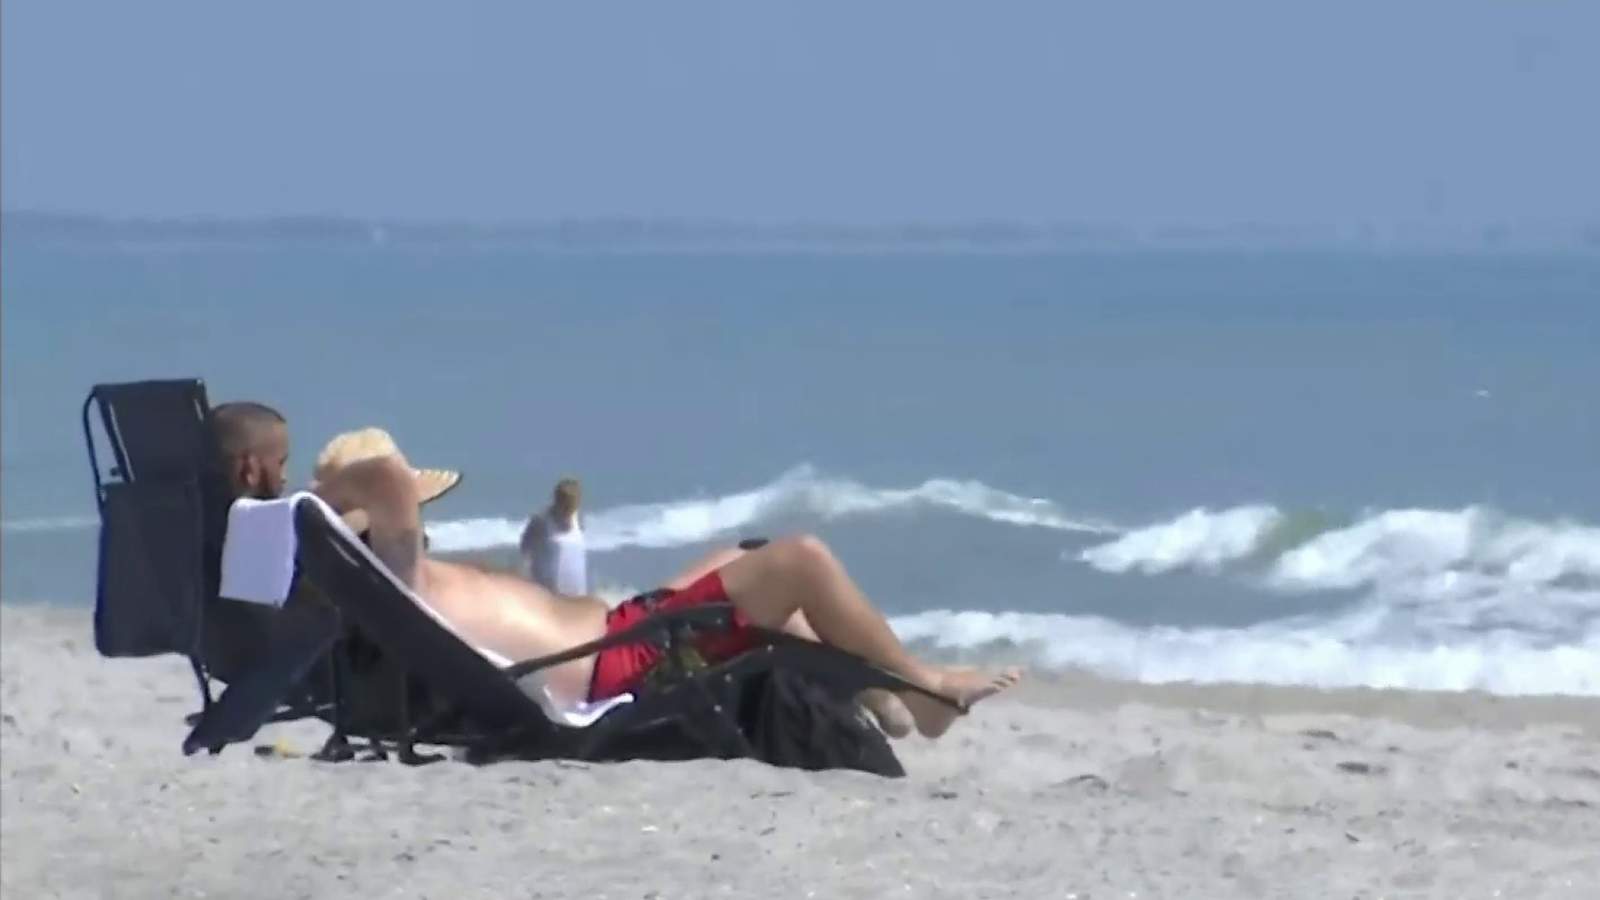 Some beach restrictions relaxed in parts of Brevard, Flagler counties